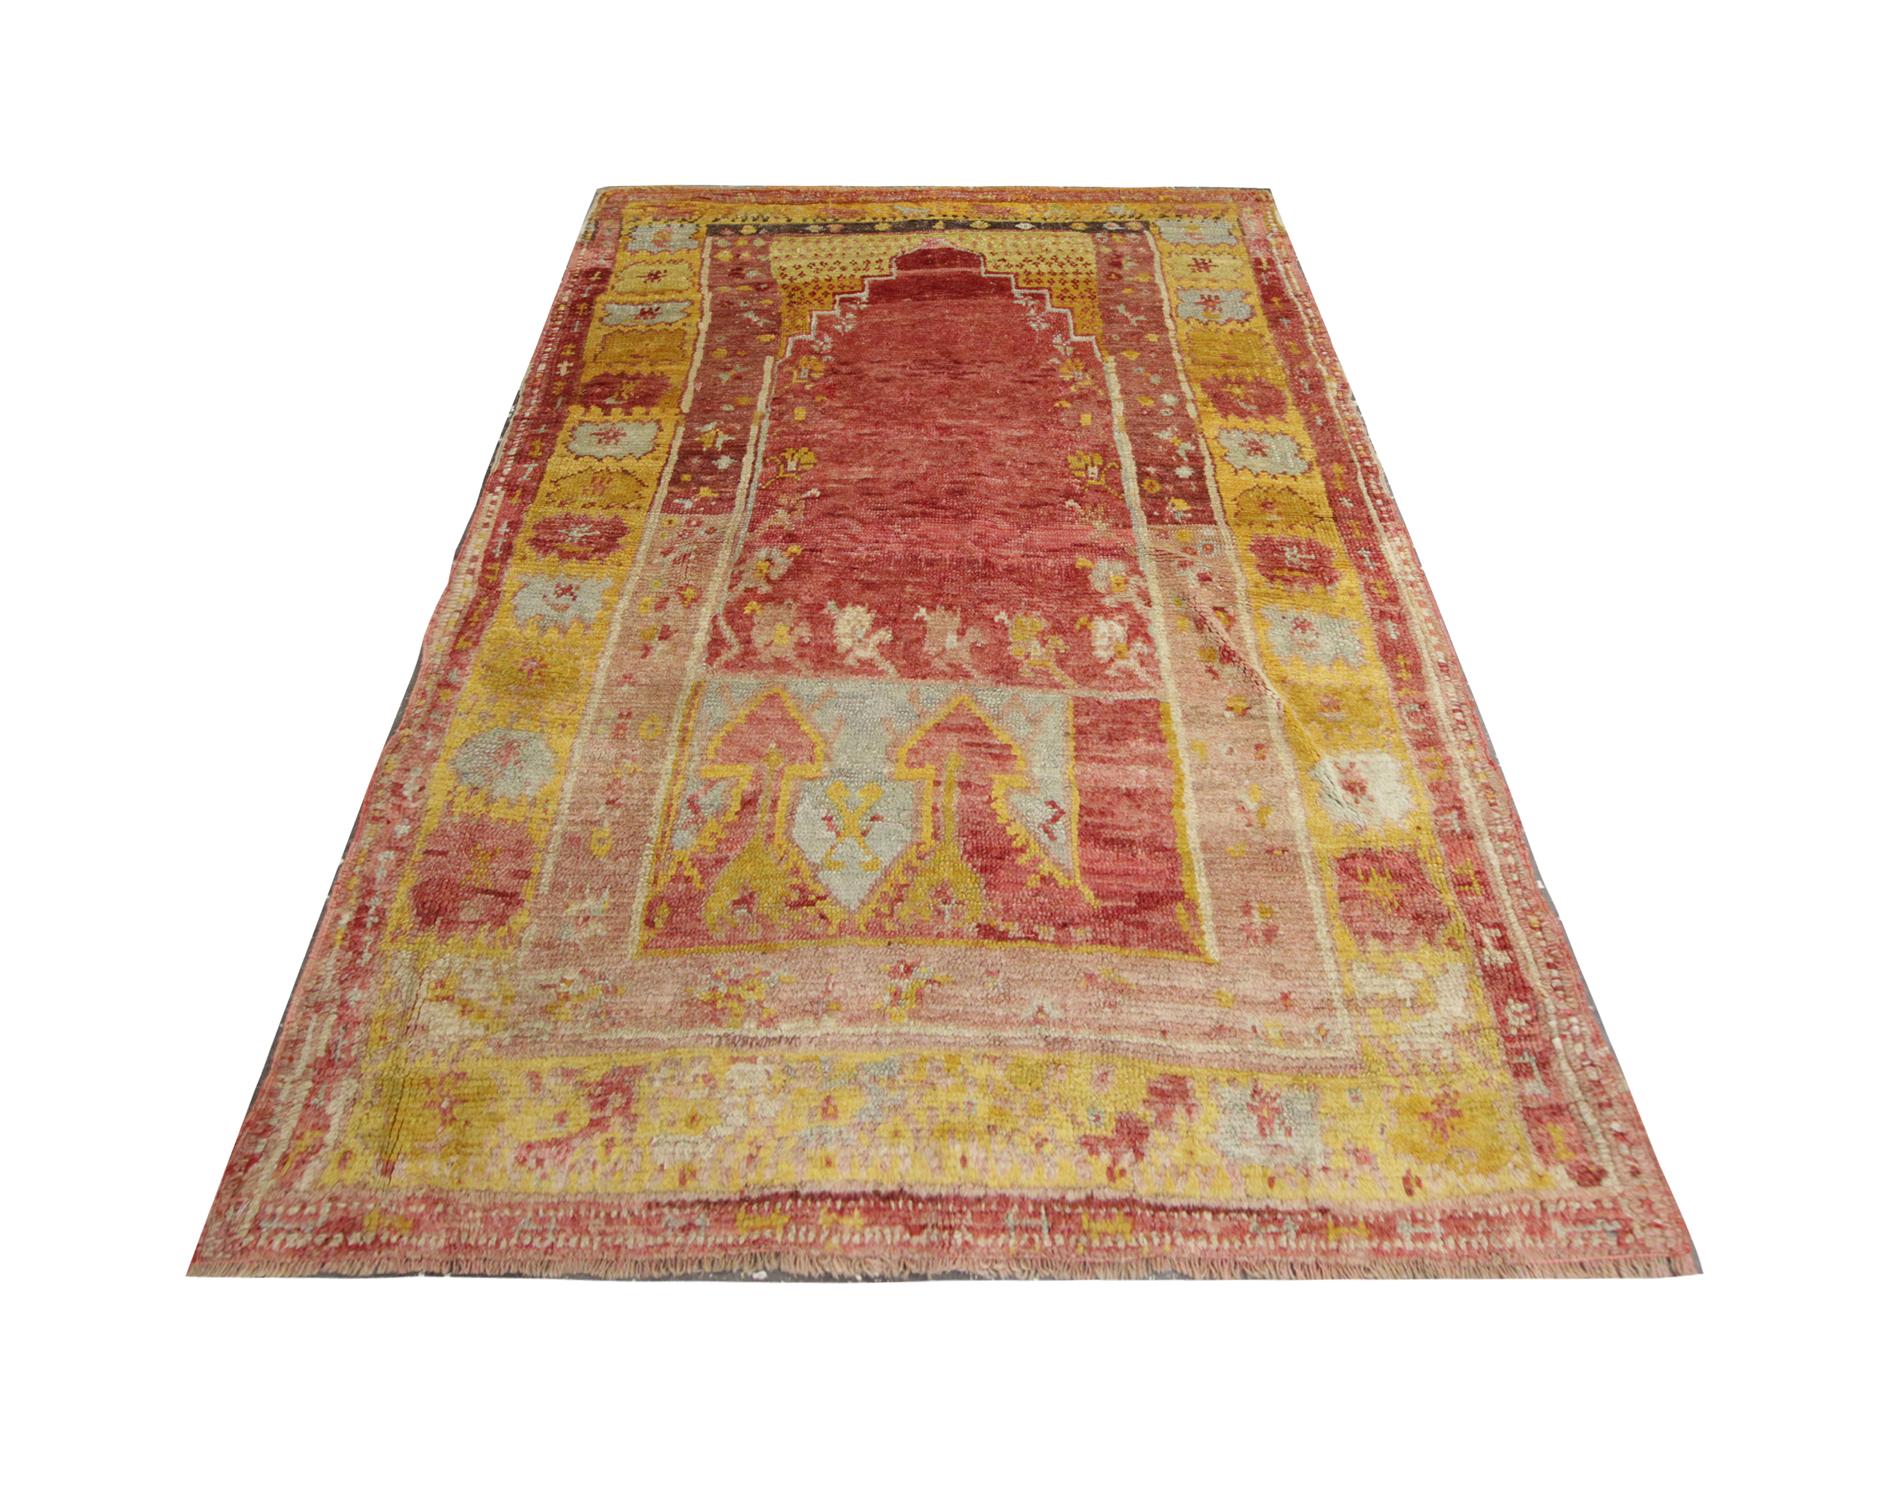 Upgrade your floors with this high-quality antique Turkish rug, hand knotted in 1940 with hand-spun, vegetable-dyed wool and cotton, woven by some of the finest rug artisans. Perfect for any modern or traditional interiors, bedrooms, living rooms or